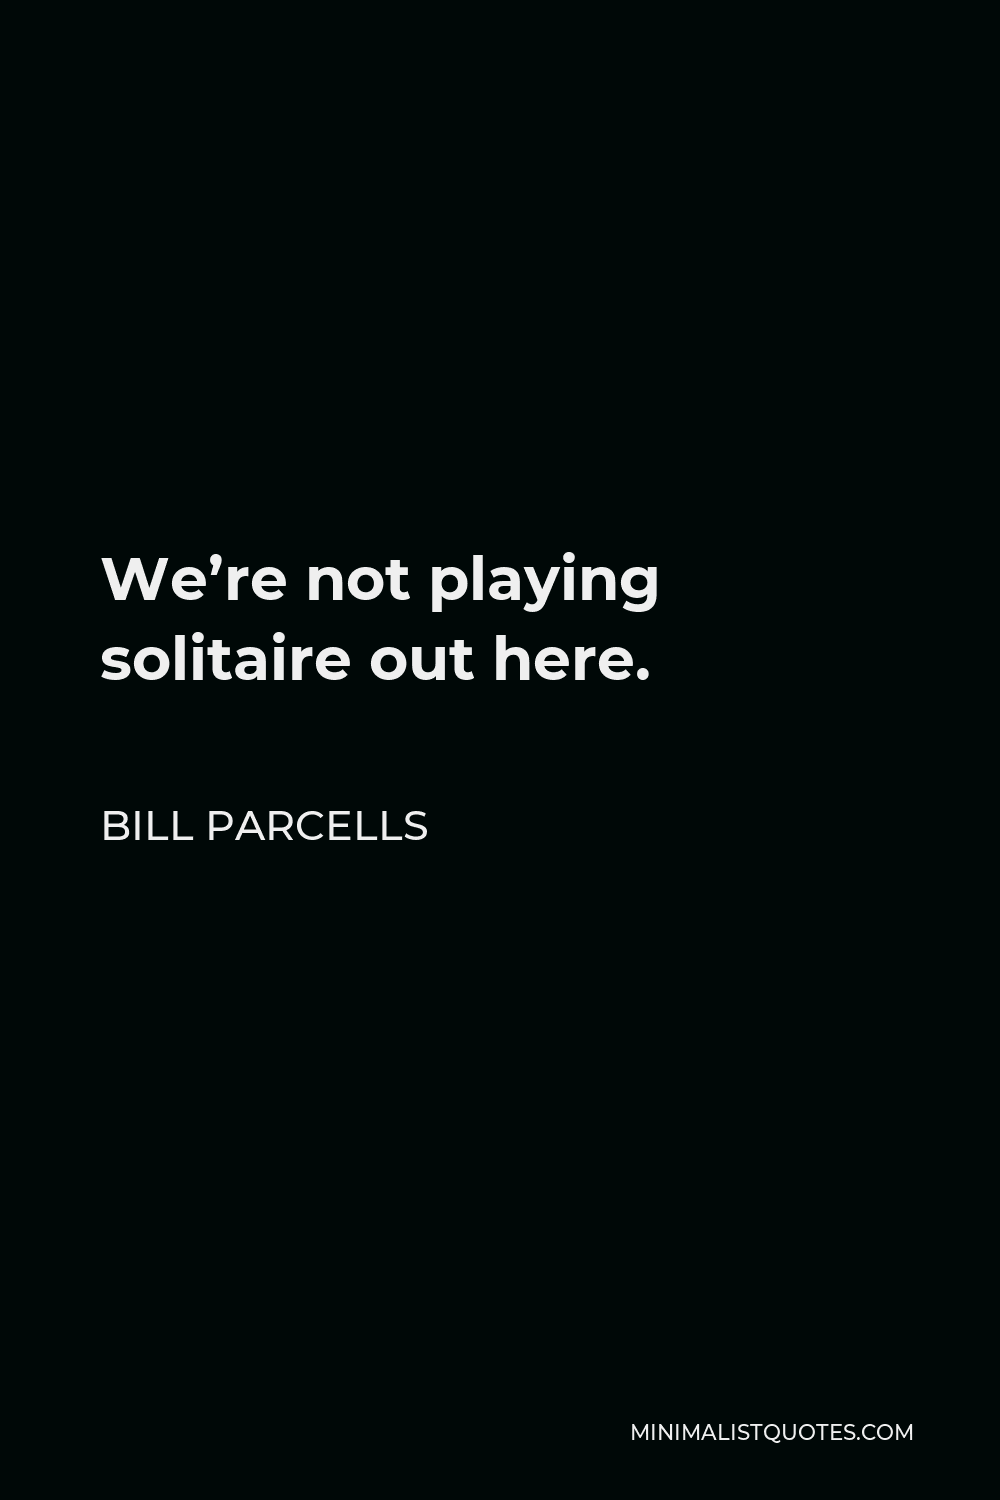 Bill Parcells Quote - We’re not playing solitaire out here.